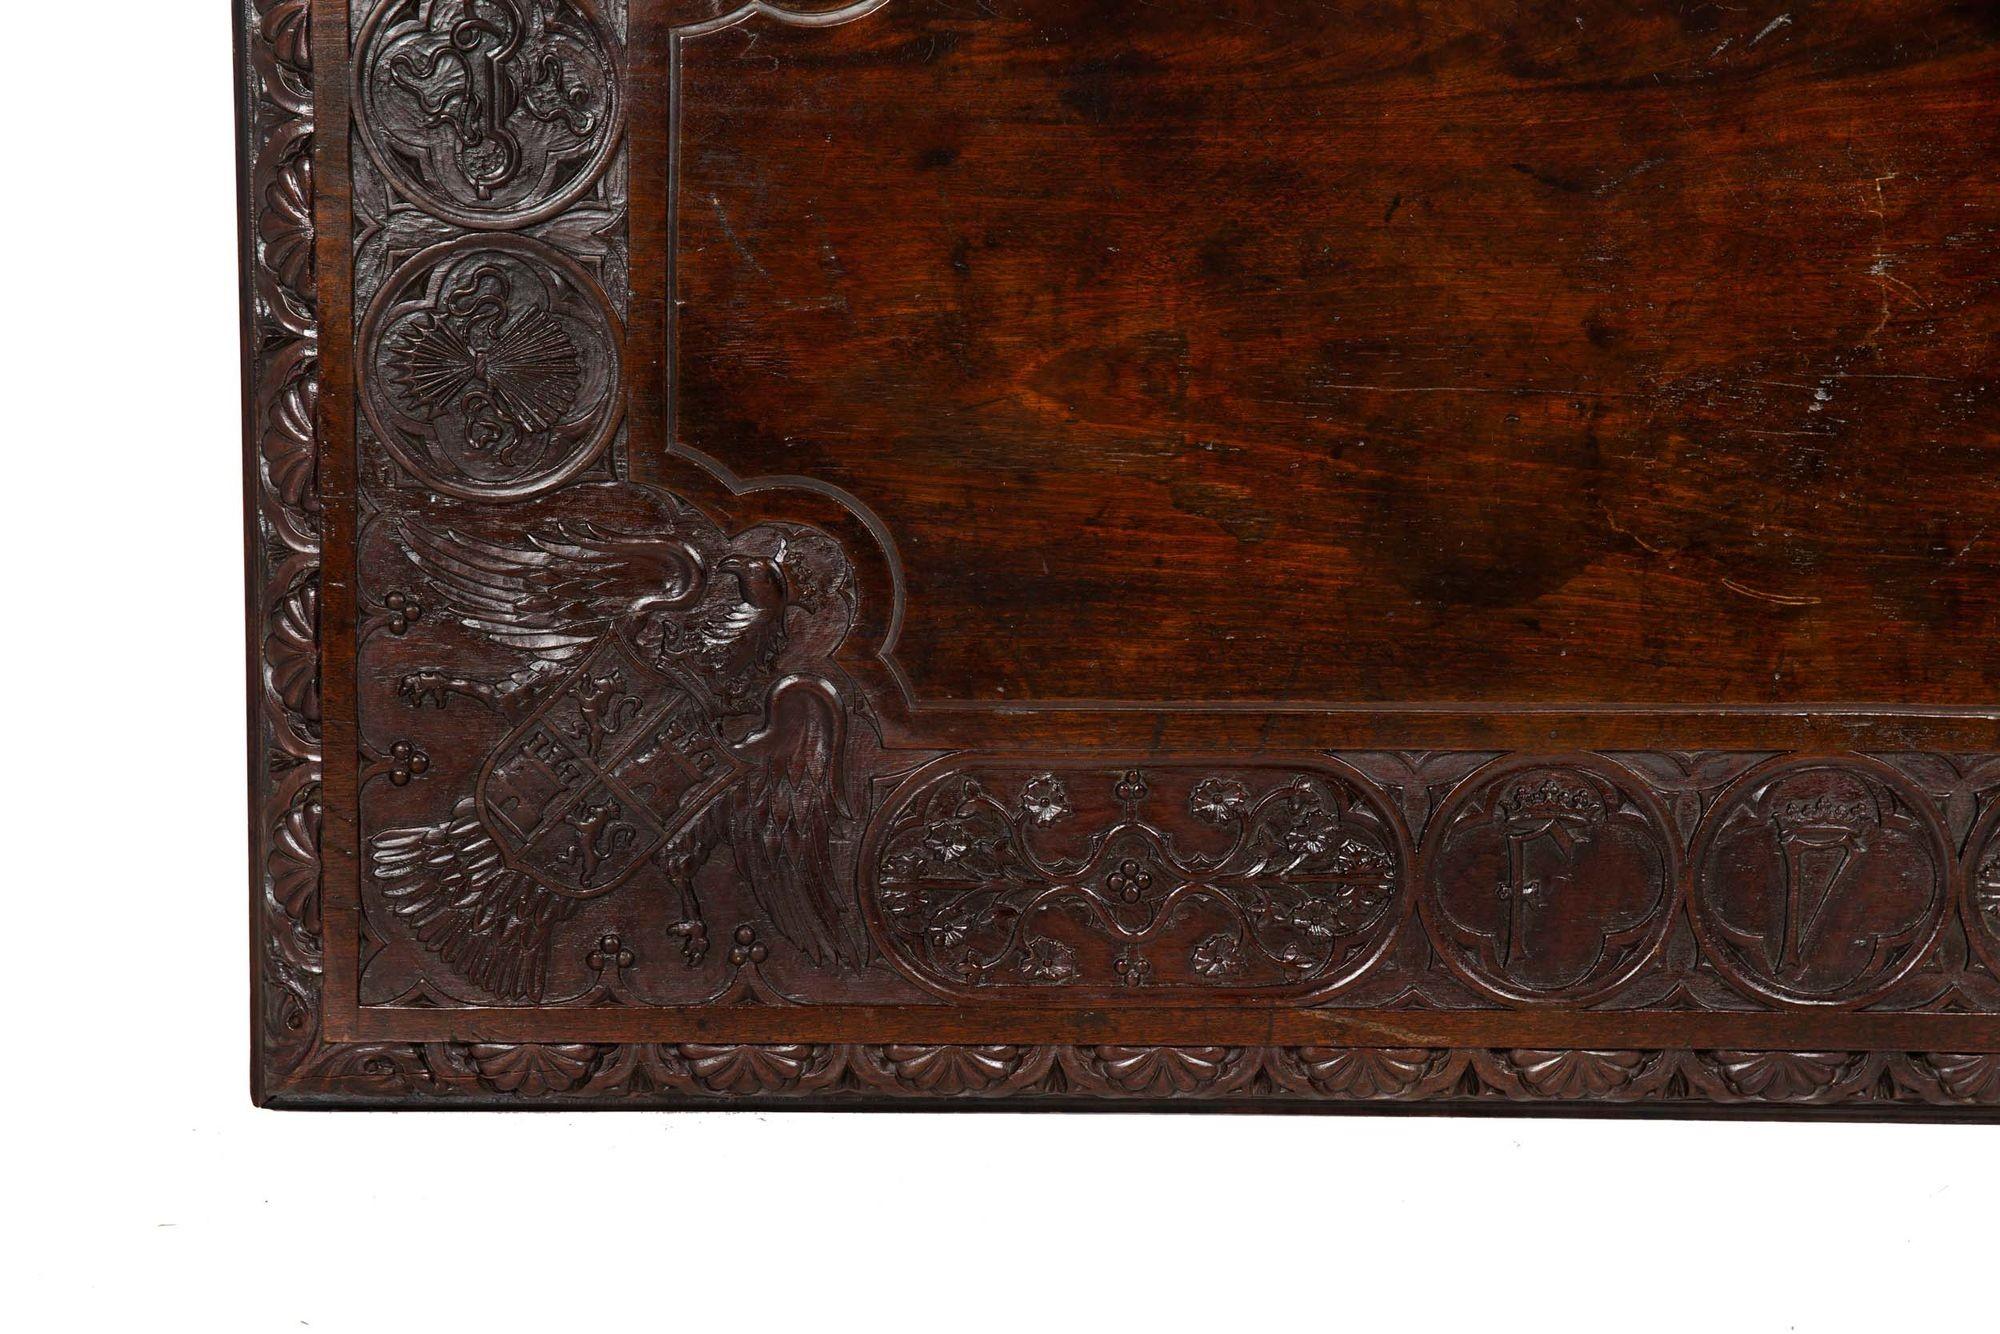 Circa 1900 Gothic Revival Antique Carved Walnut Library Table For Sale 8